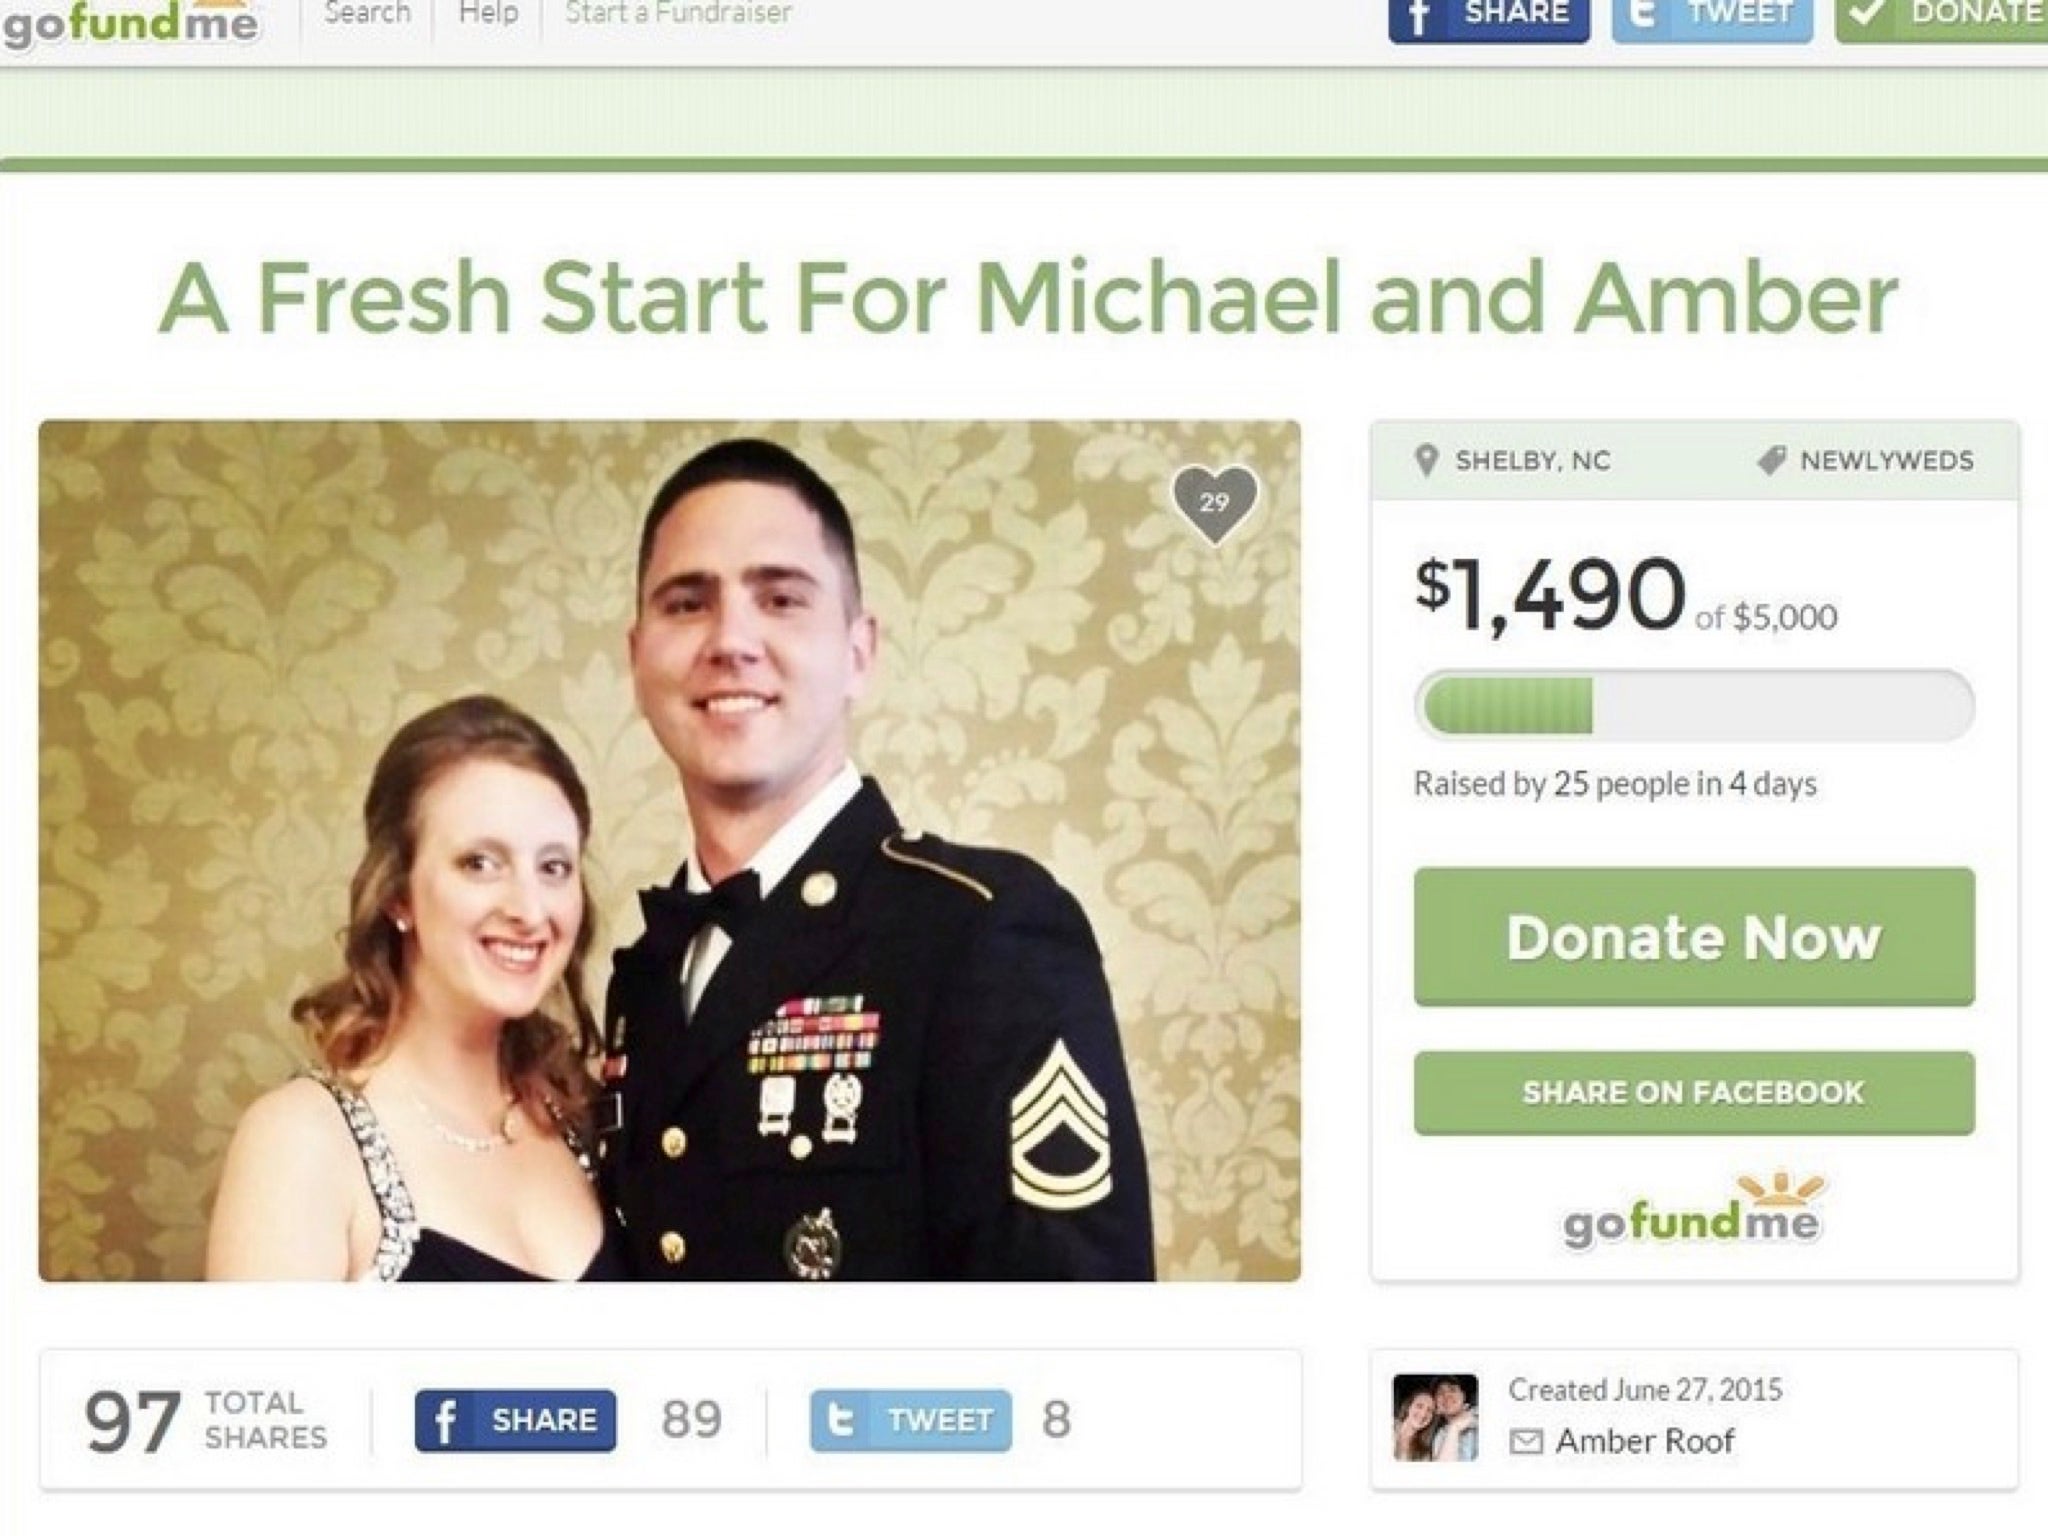 Amber Roof's Gofundme page